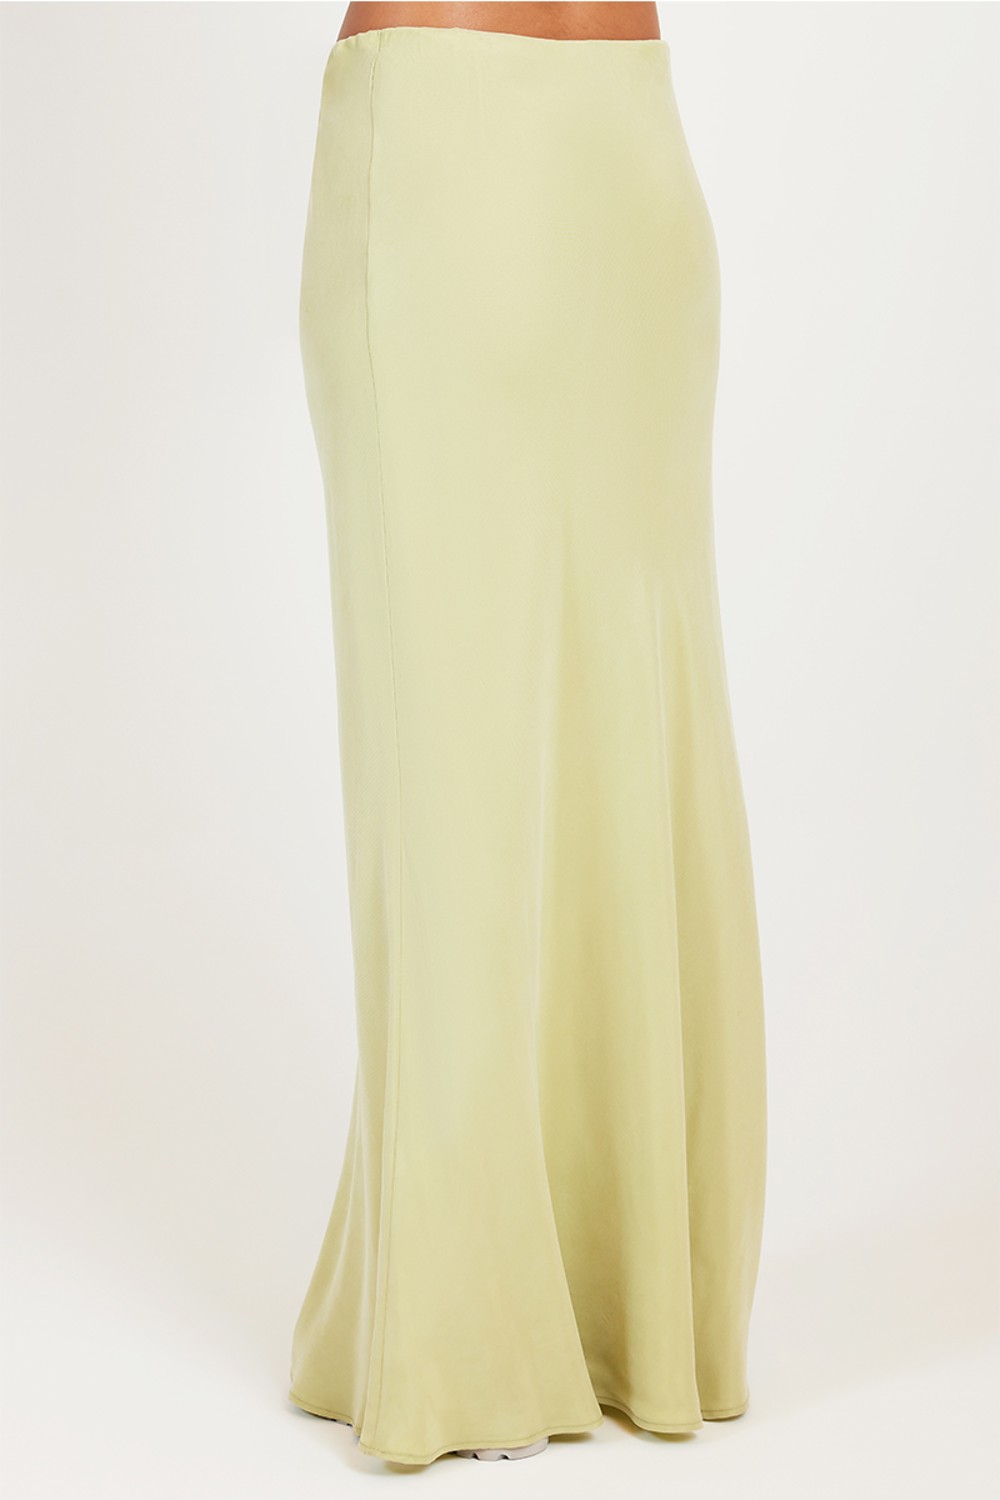 Nude Lucy Ines Cupro Skirt Lime | Stylerunner